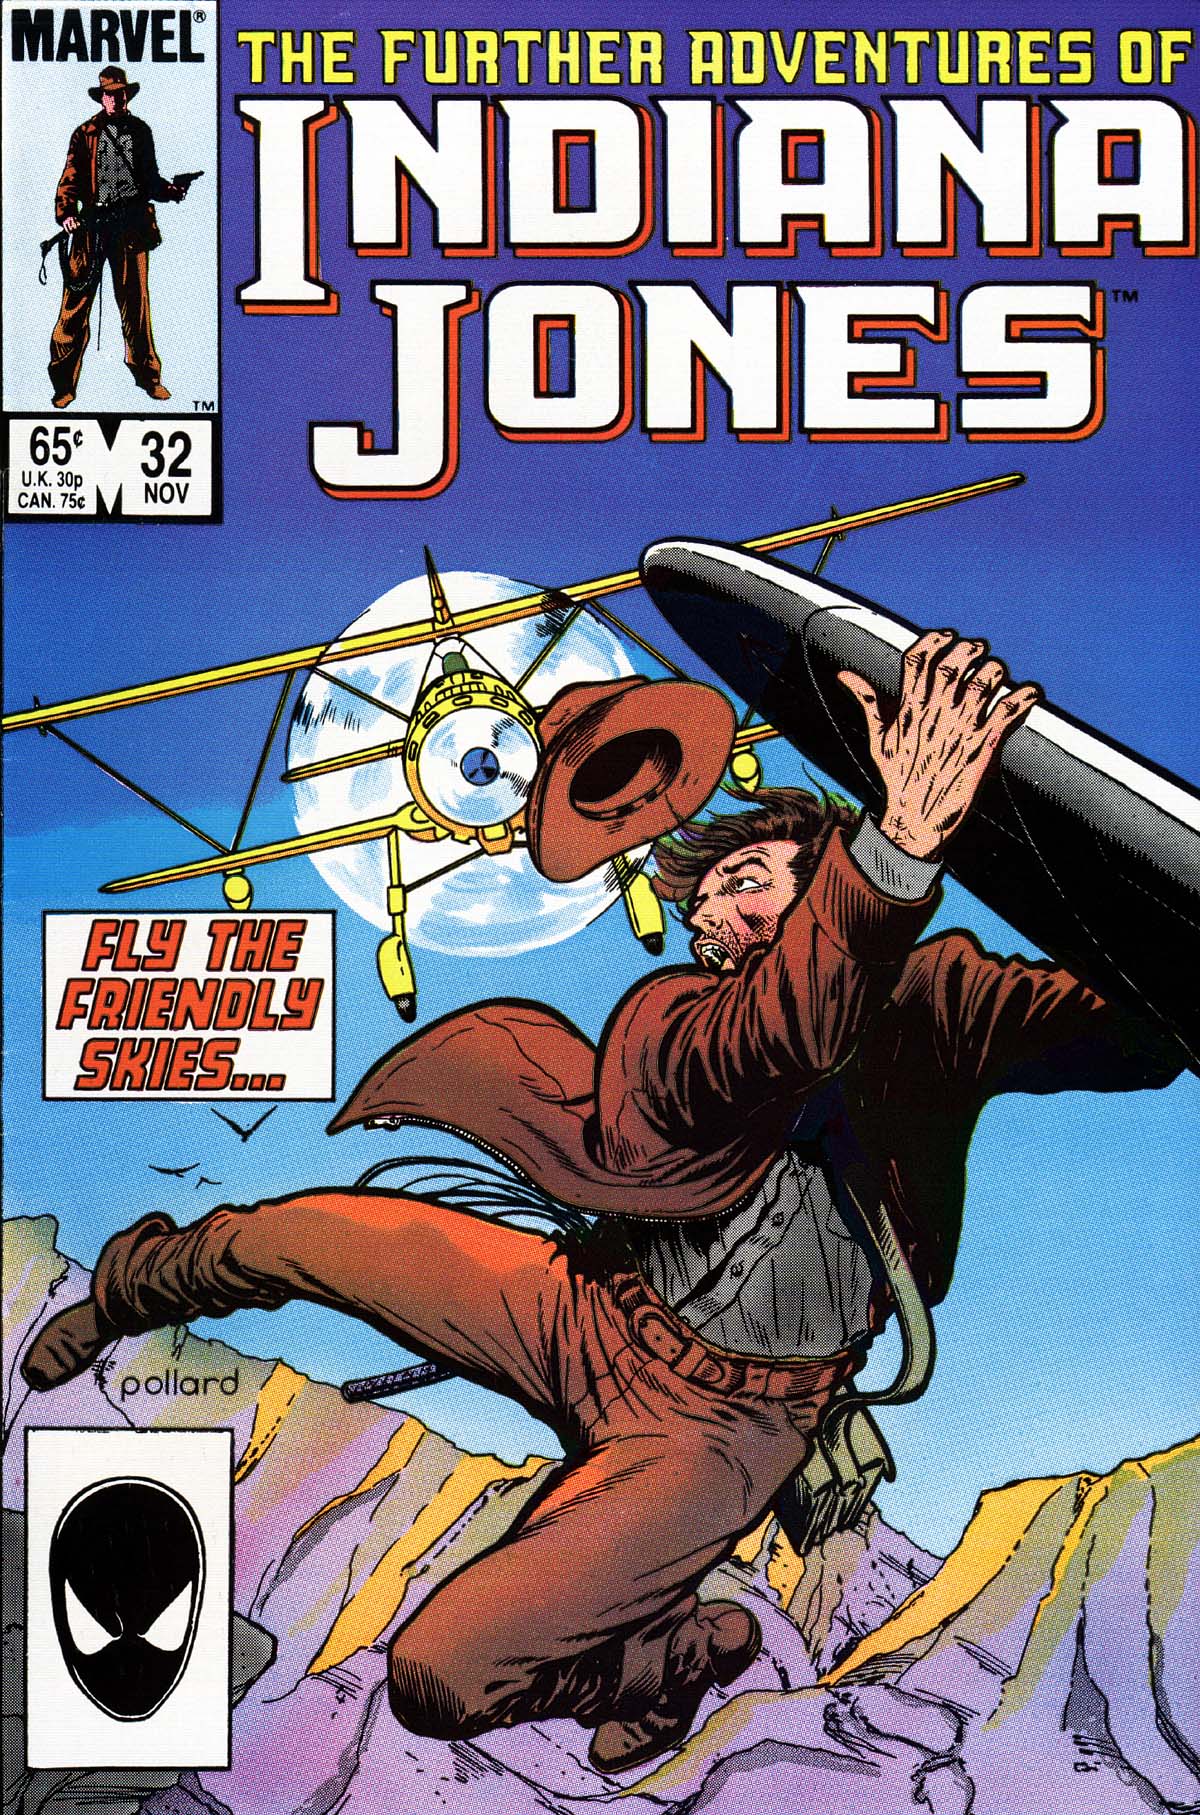 Read online The Further Adventures of Indiana Jones comic -  Issue #32 - 1